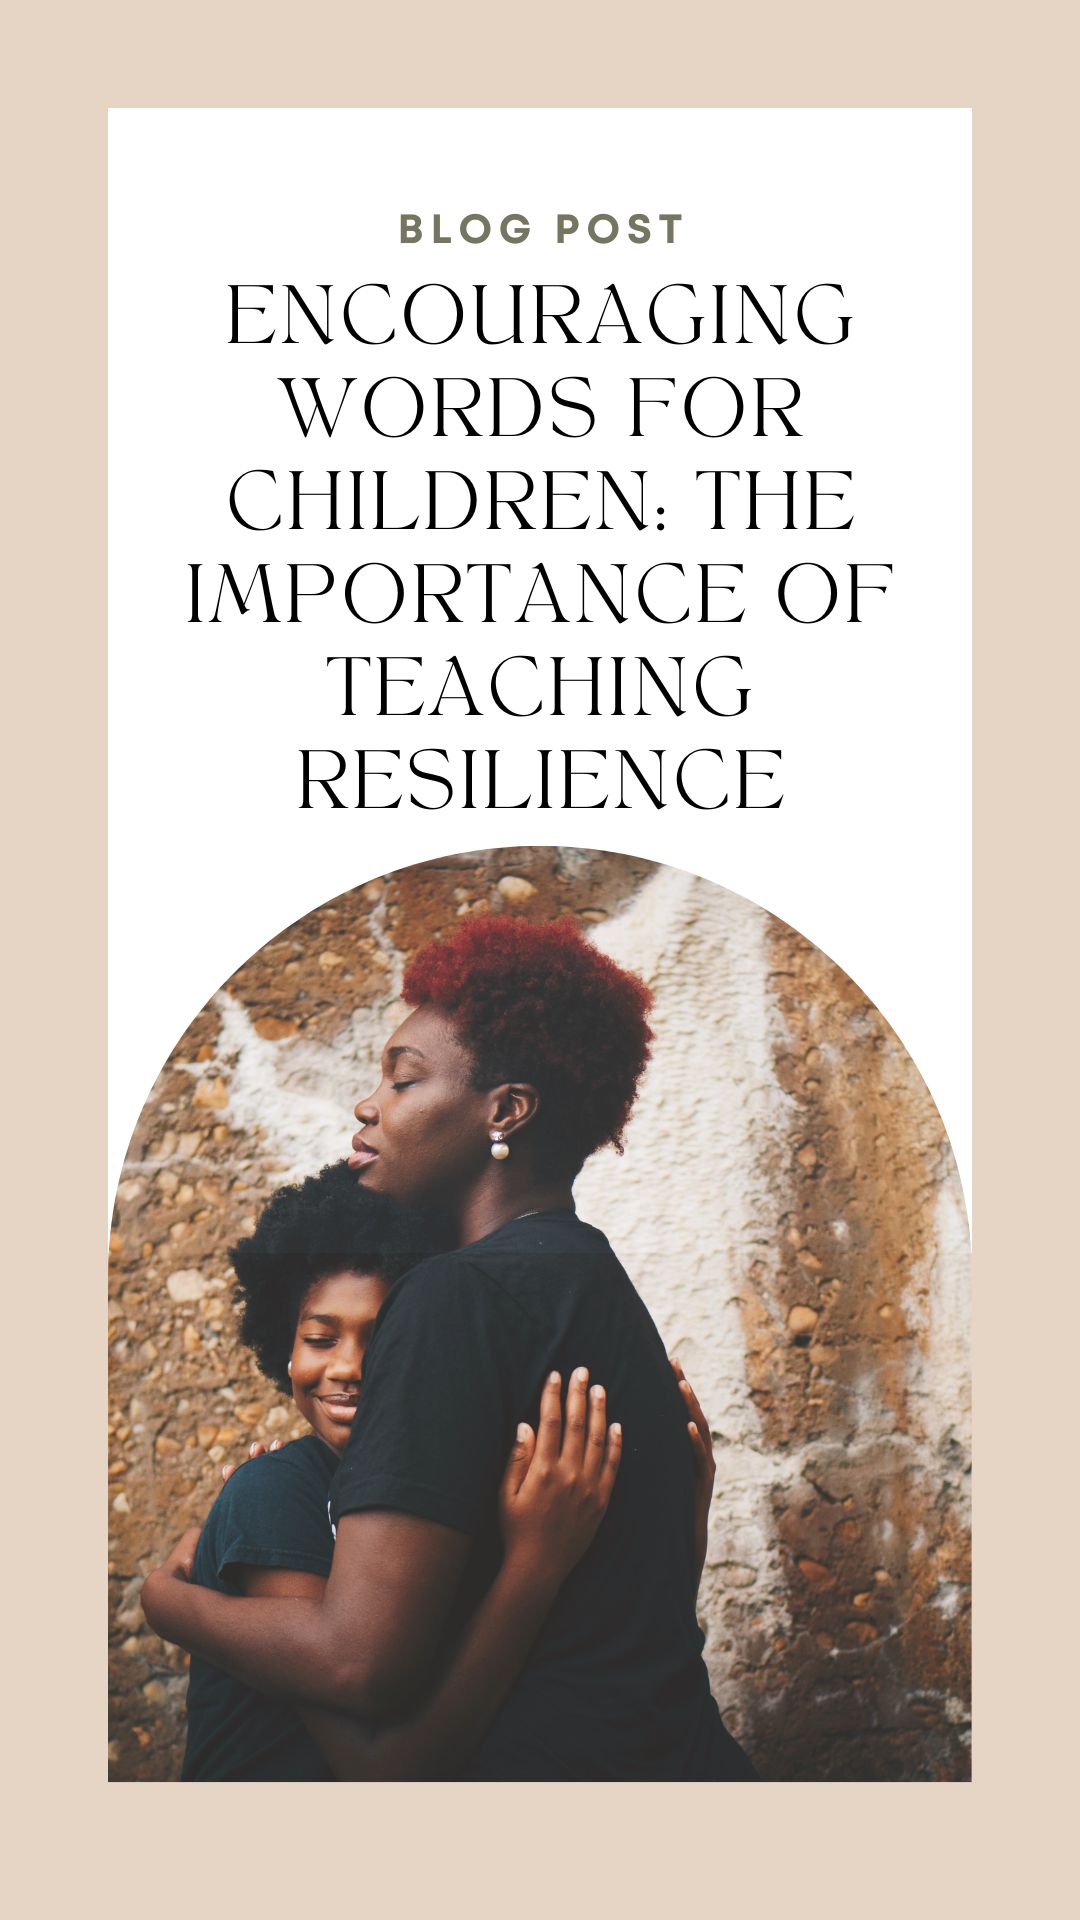 Encouraging Words for Children: The Importance of Teaching Resilience